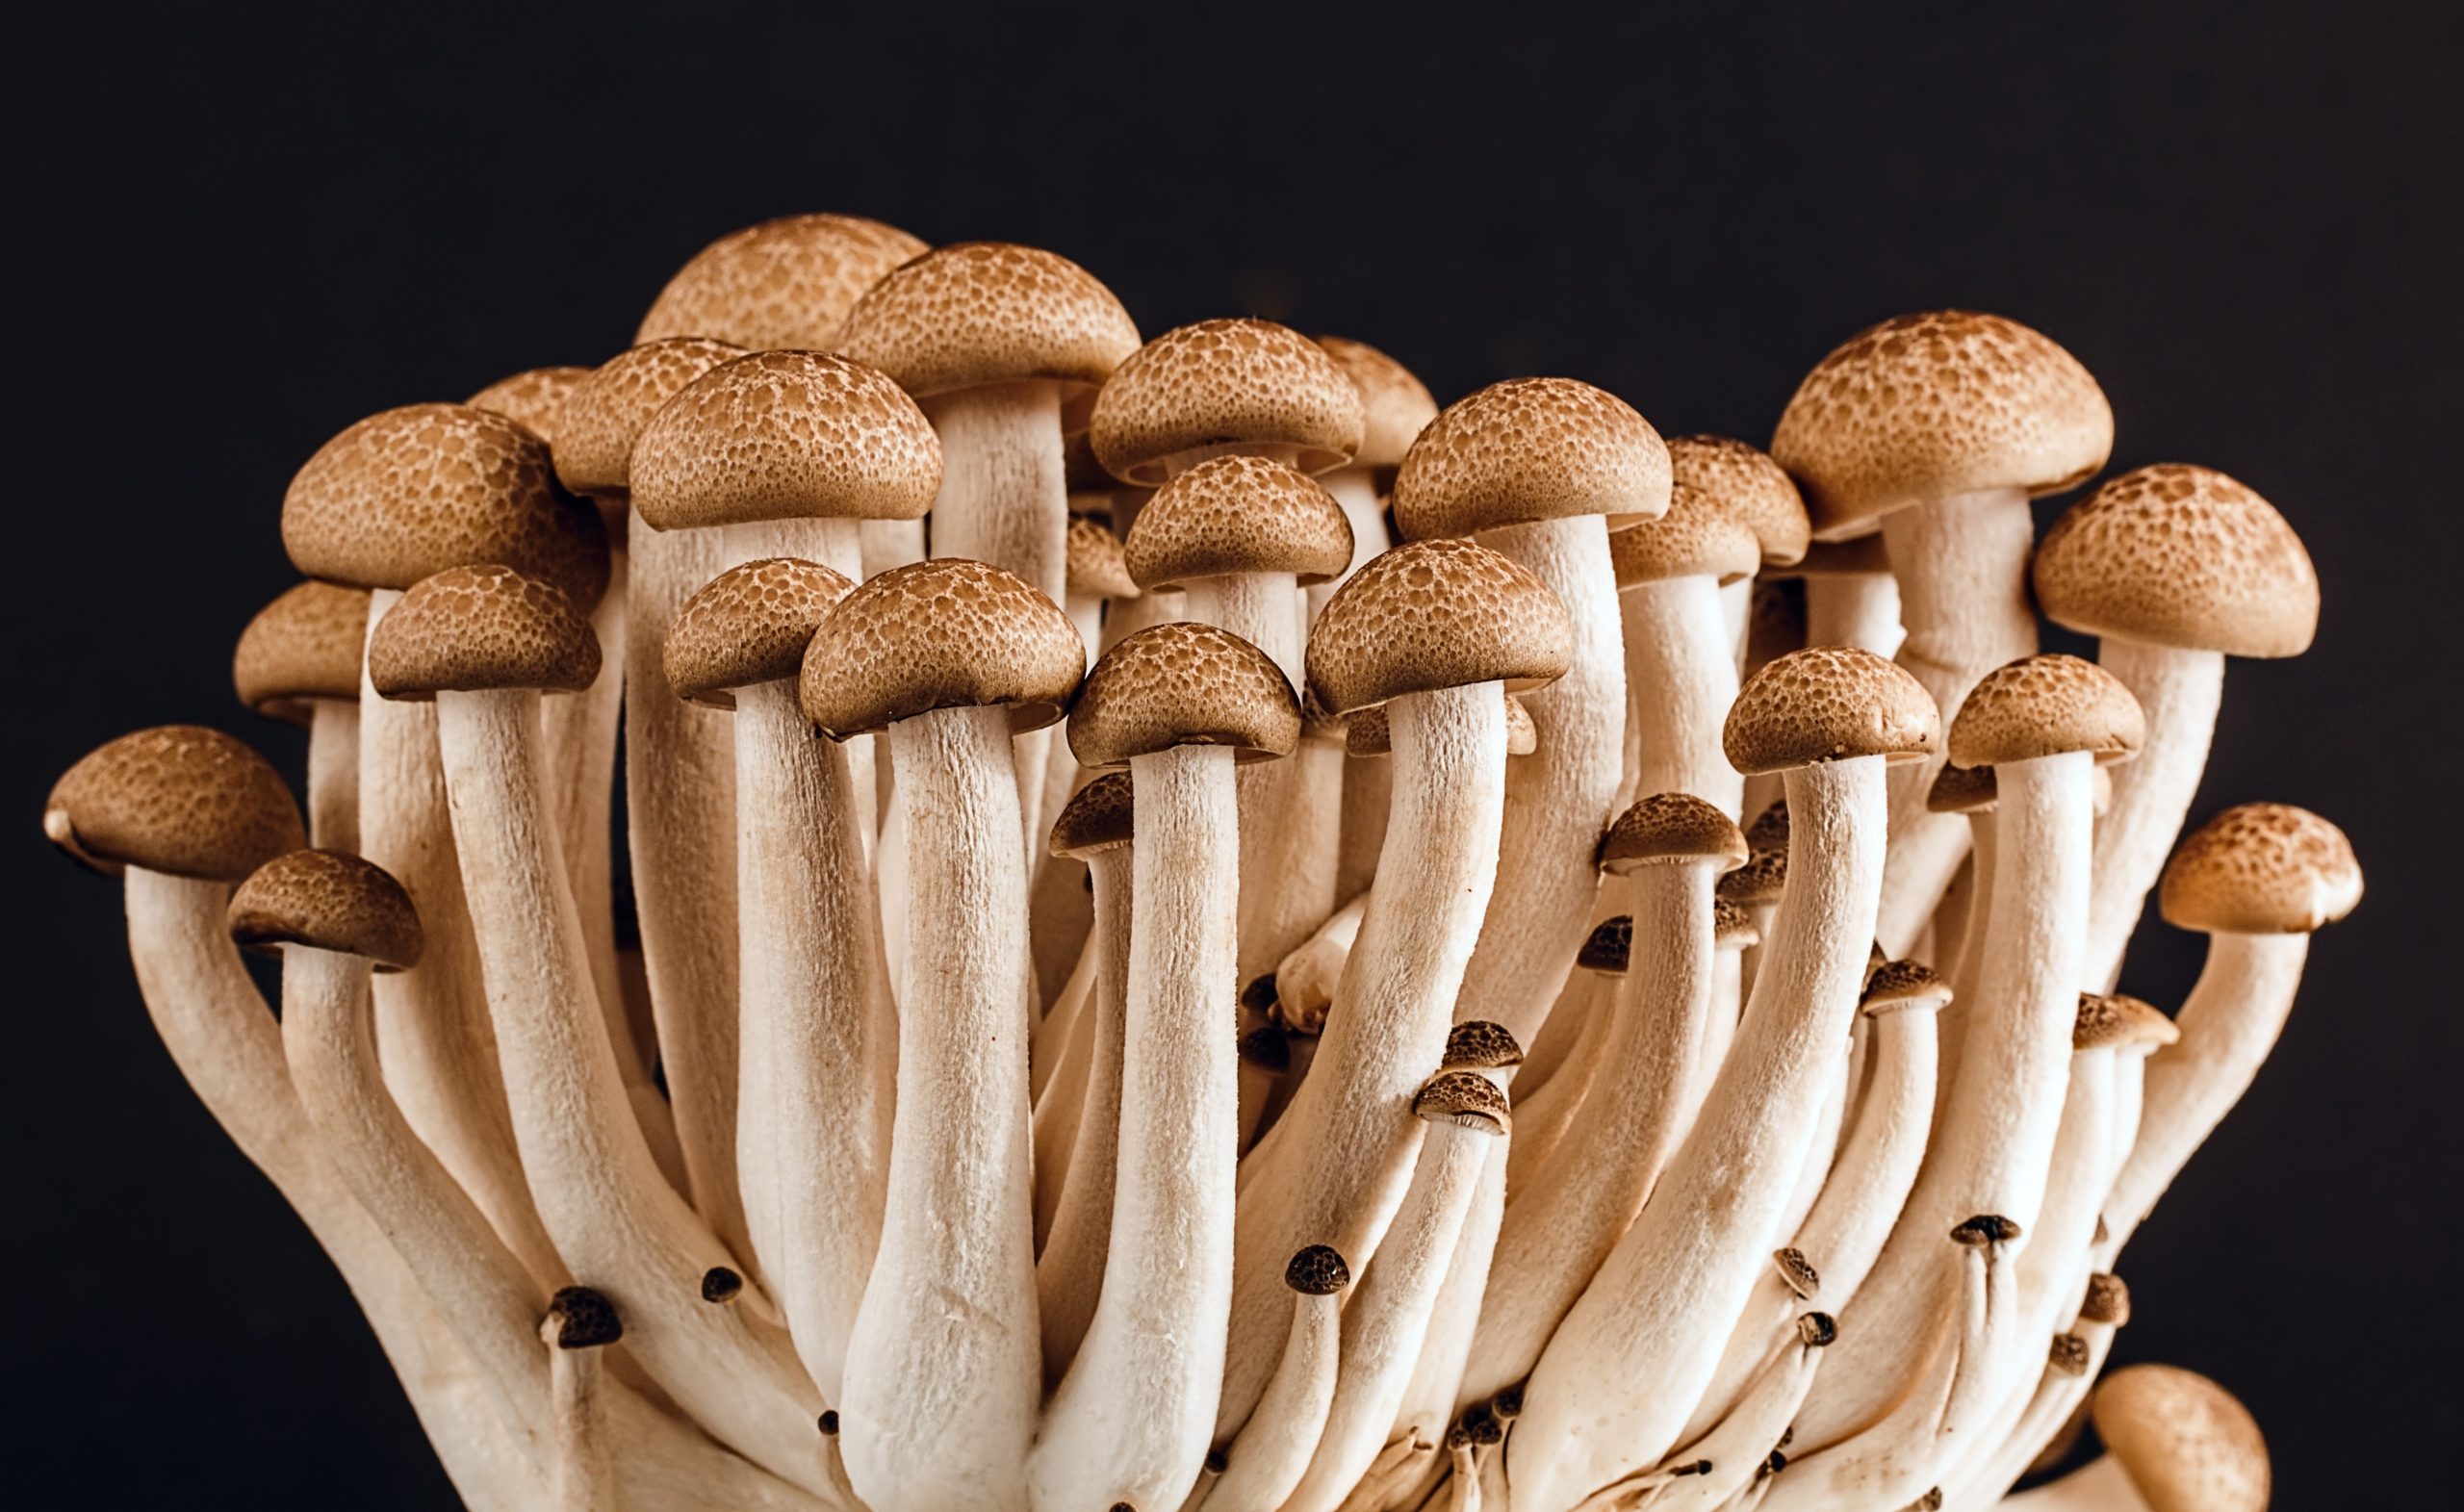 10 Healthy facts about mushrooms